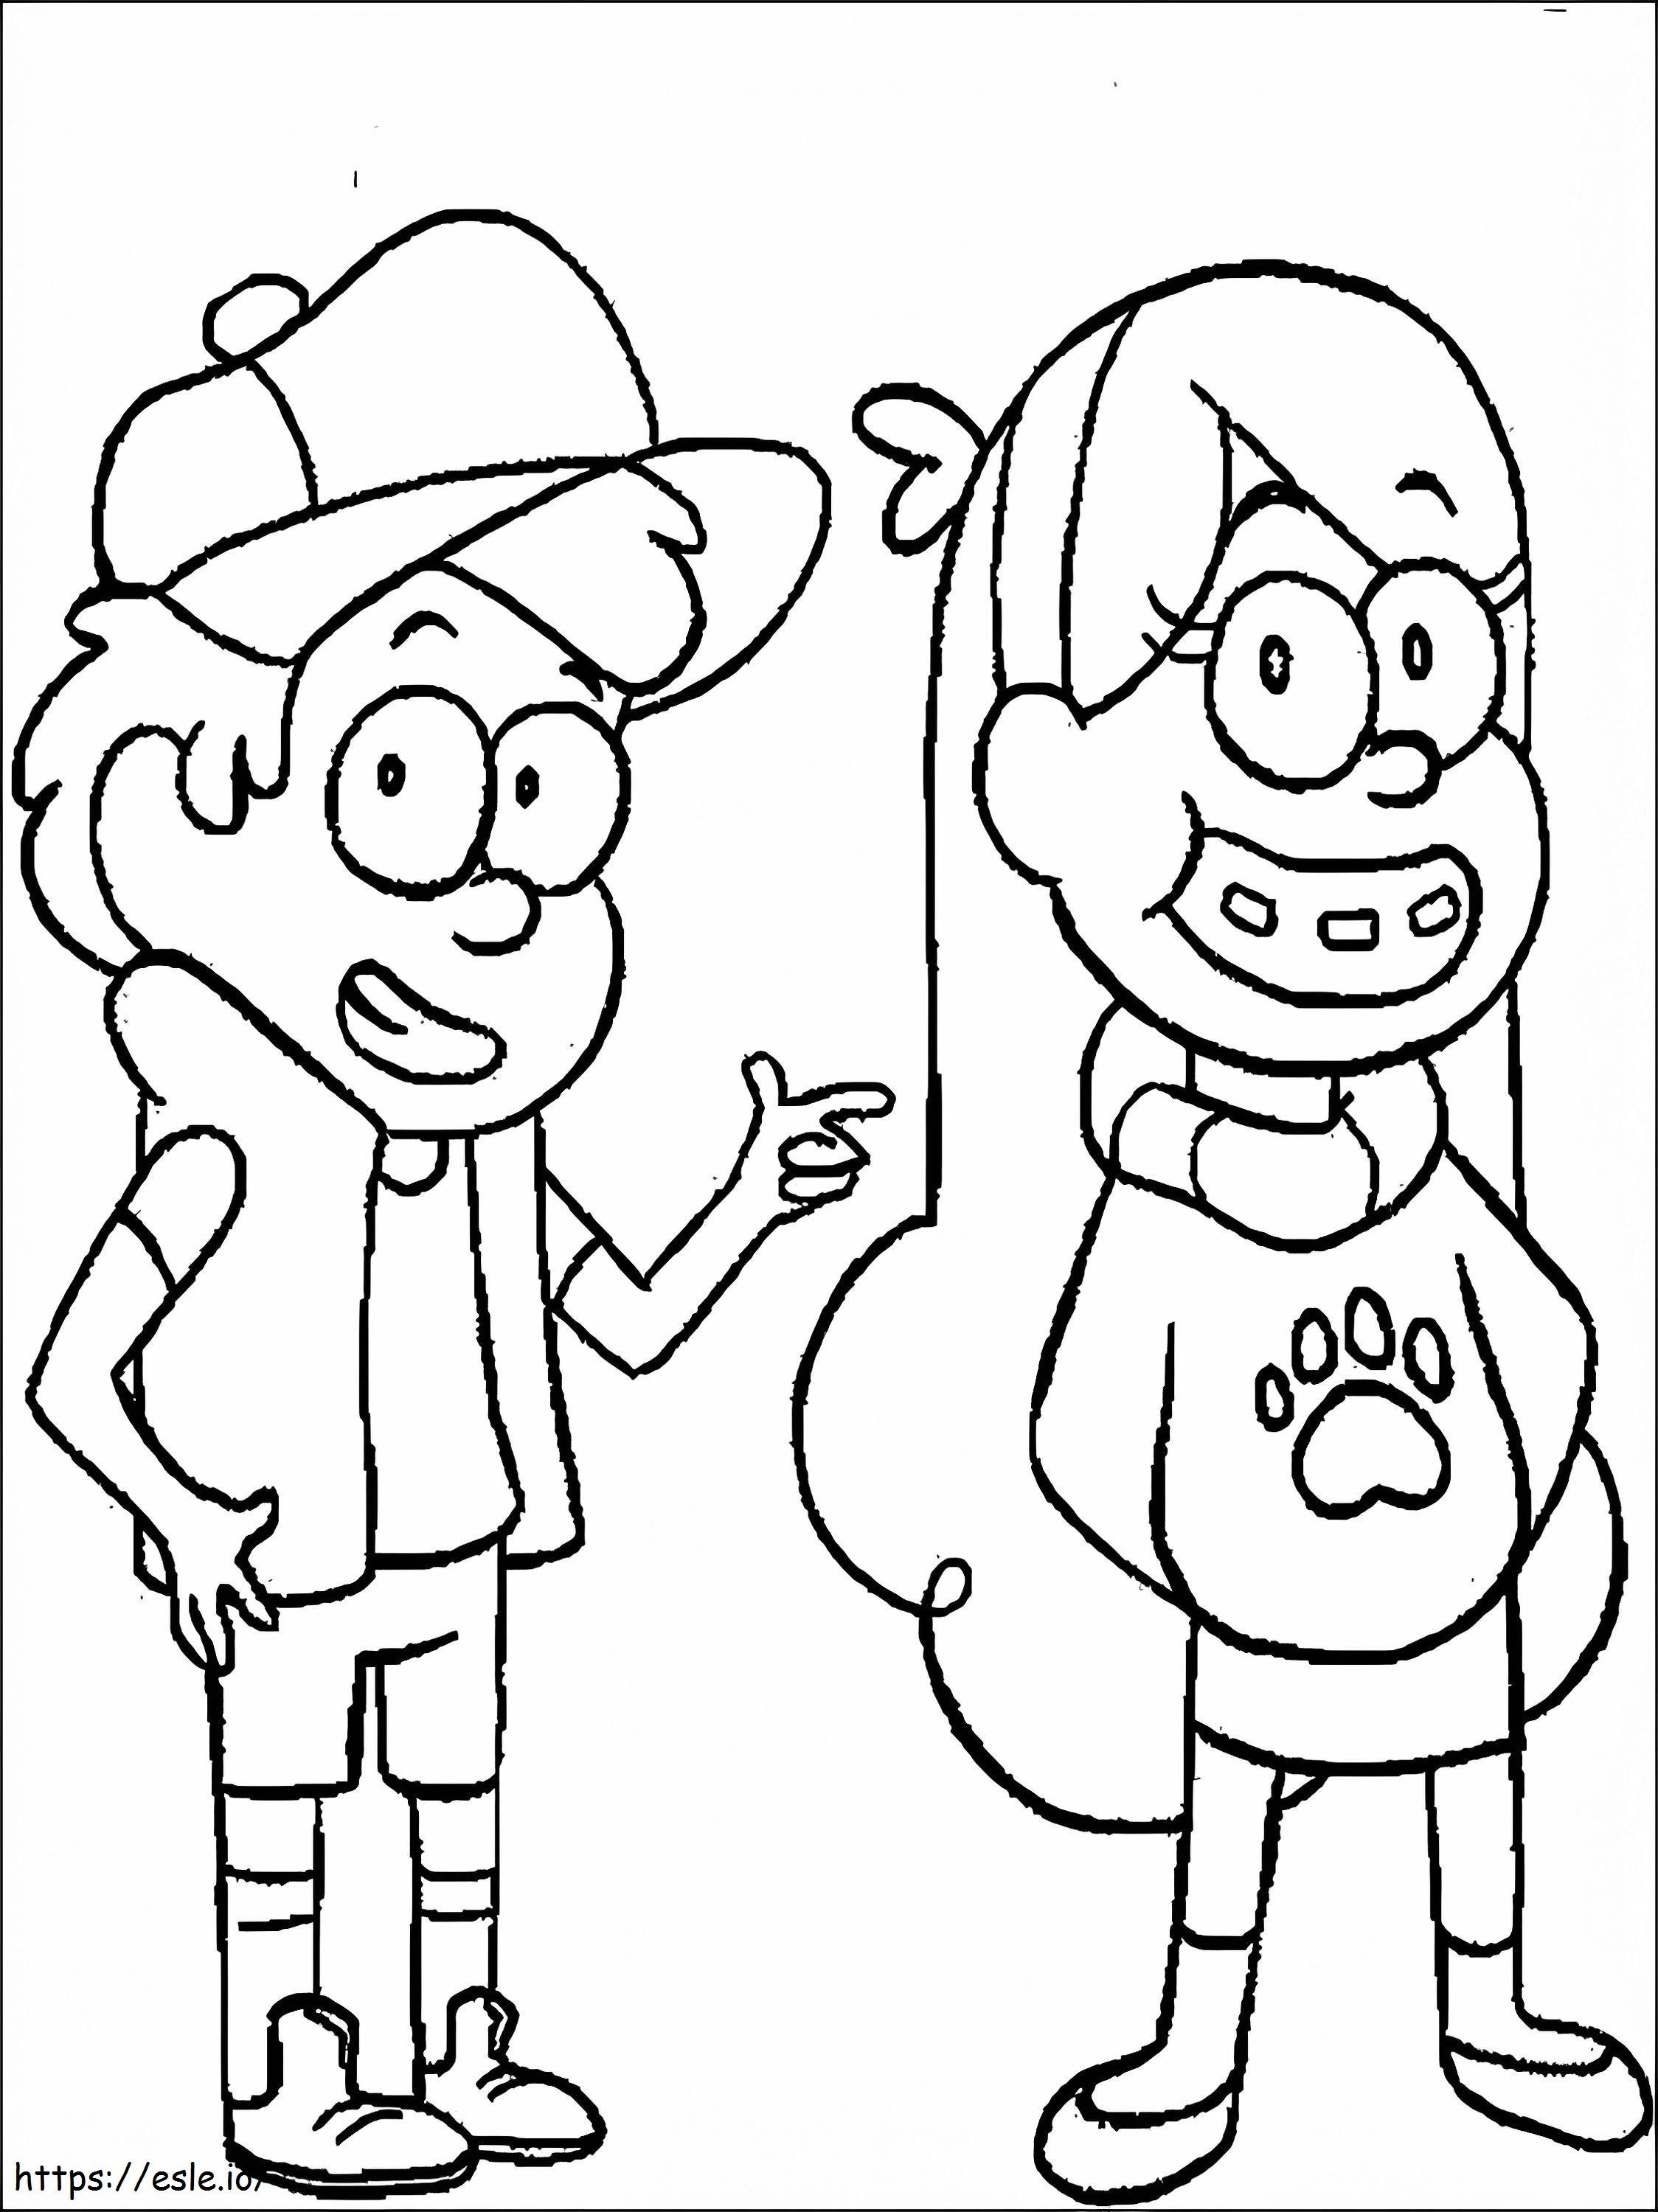 1529030627 1A4 coloring page